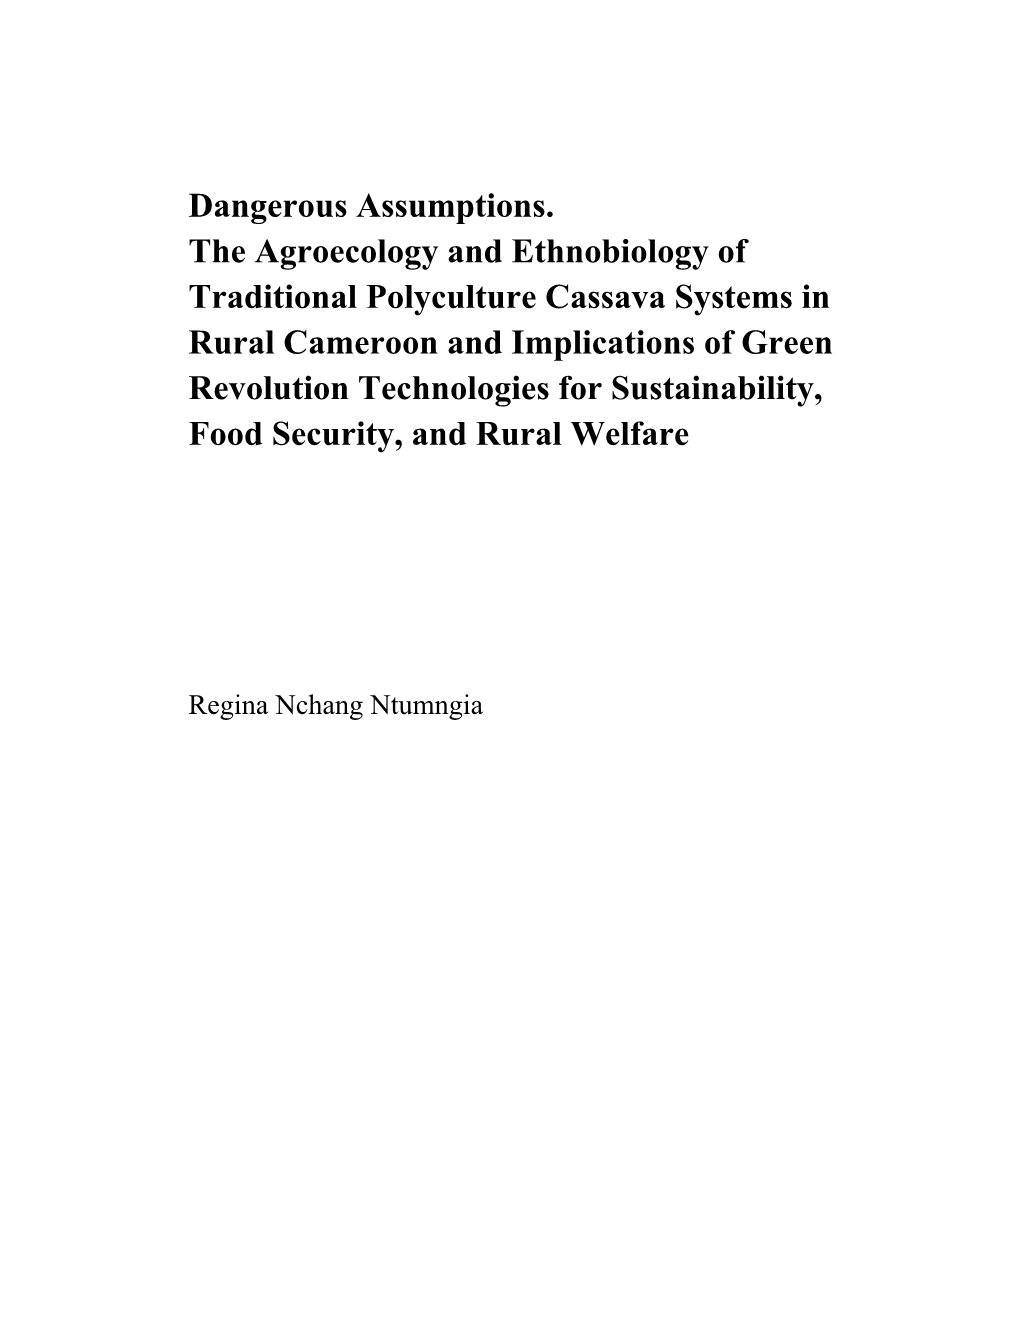 Dangerous Assumptions. the Agroecology and Ethnobiology Of